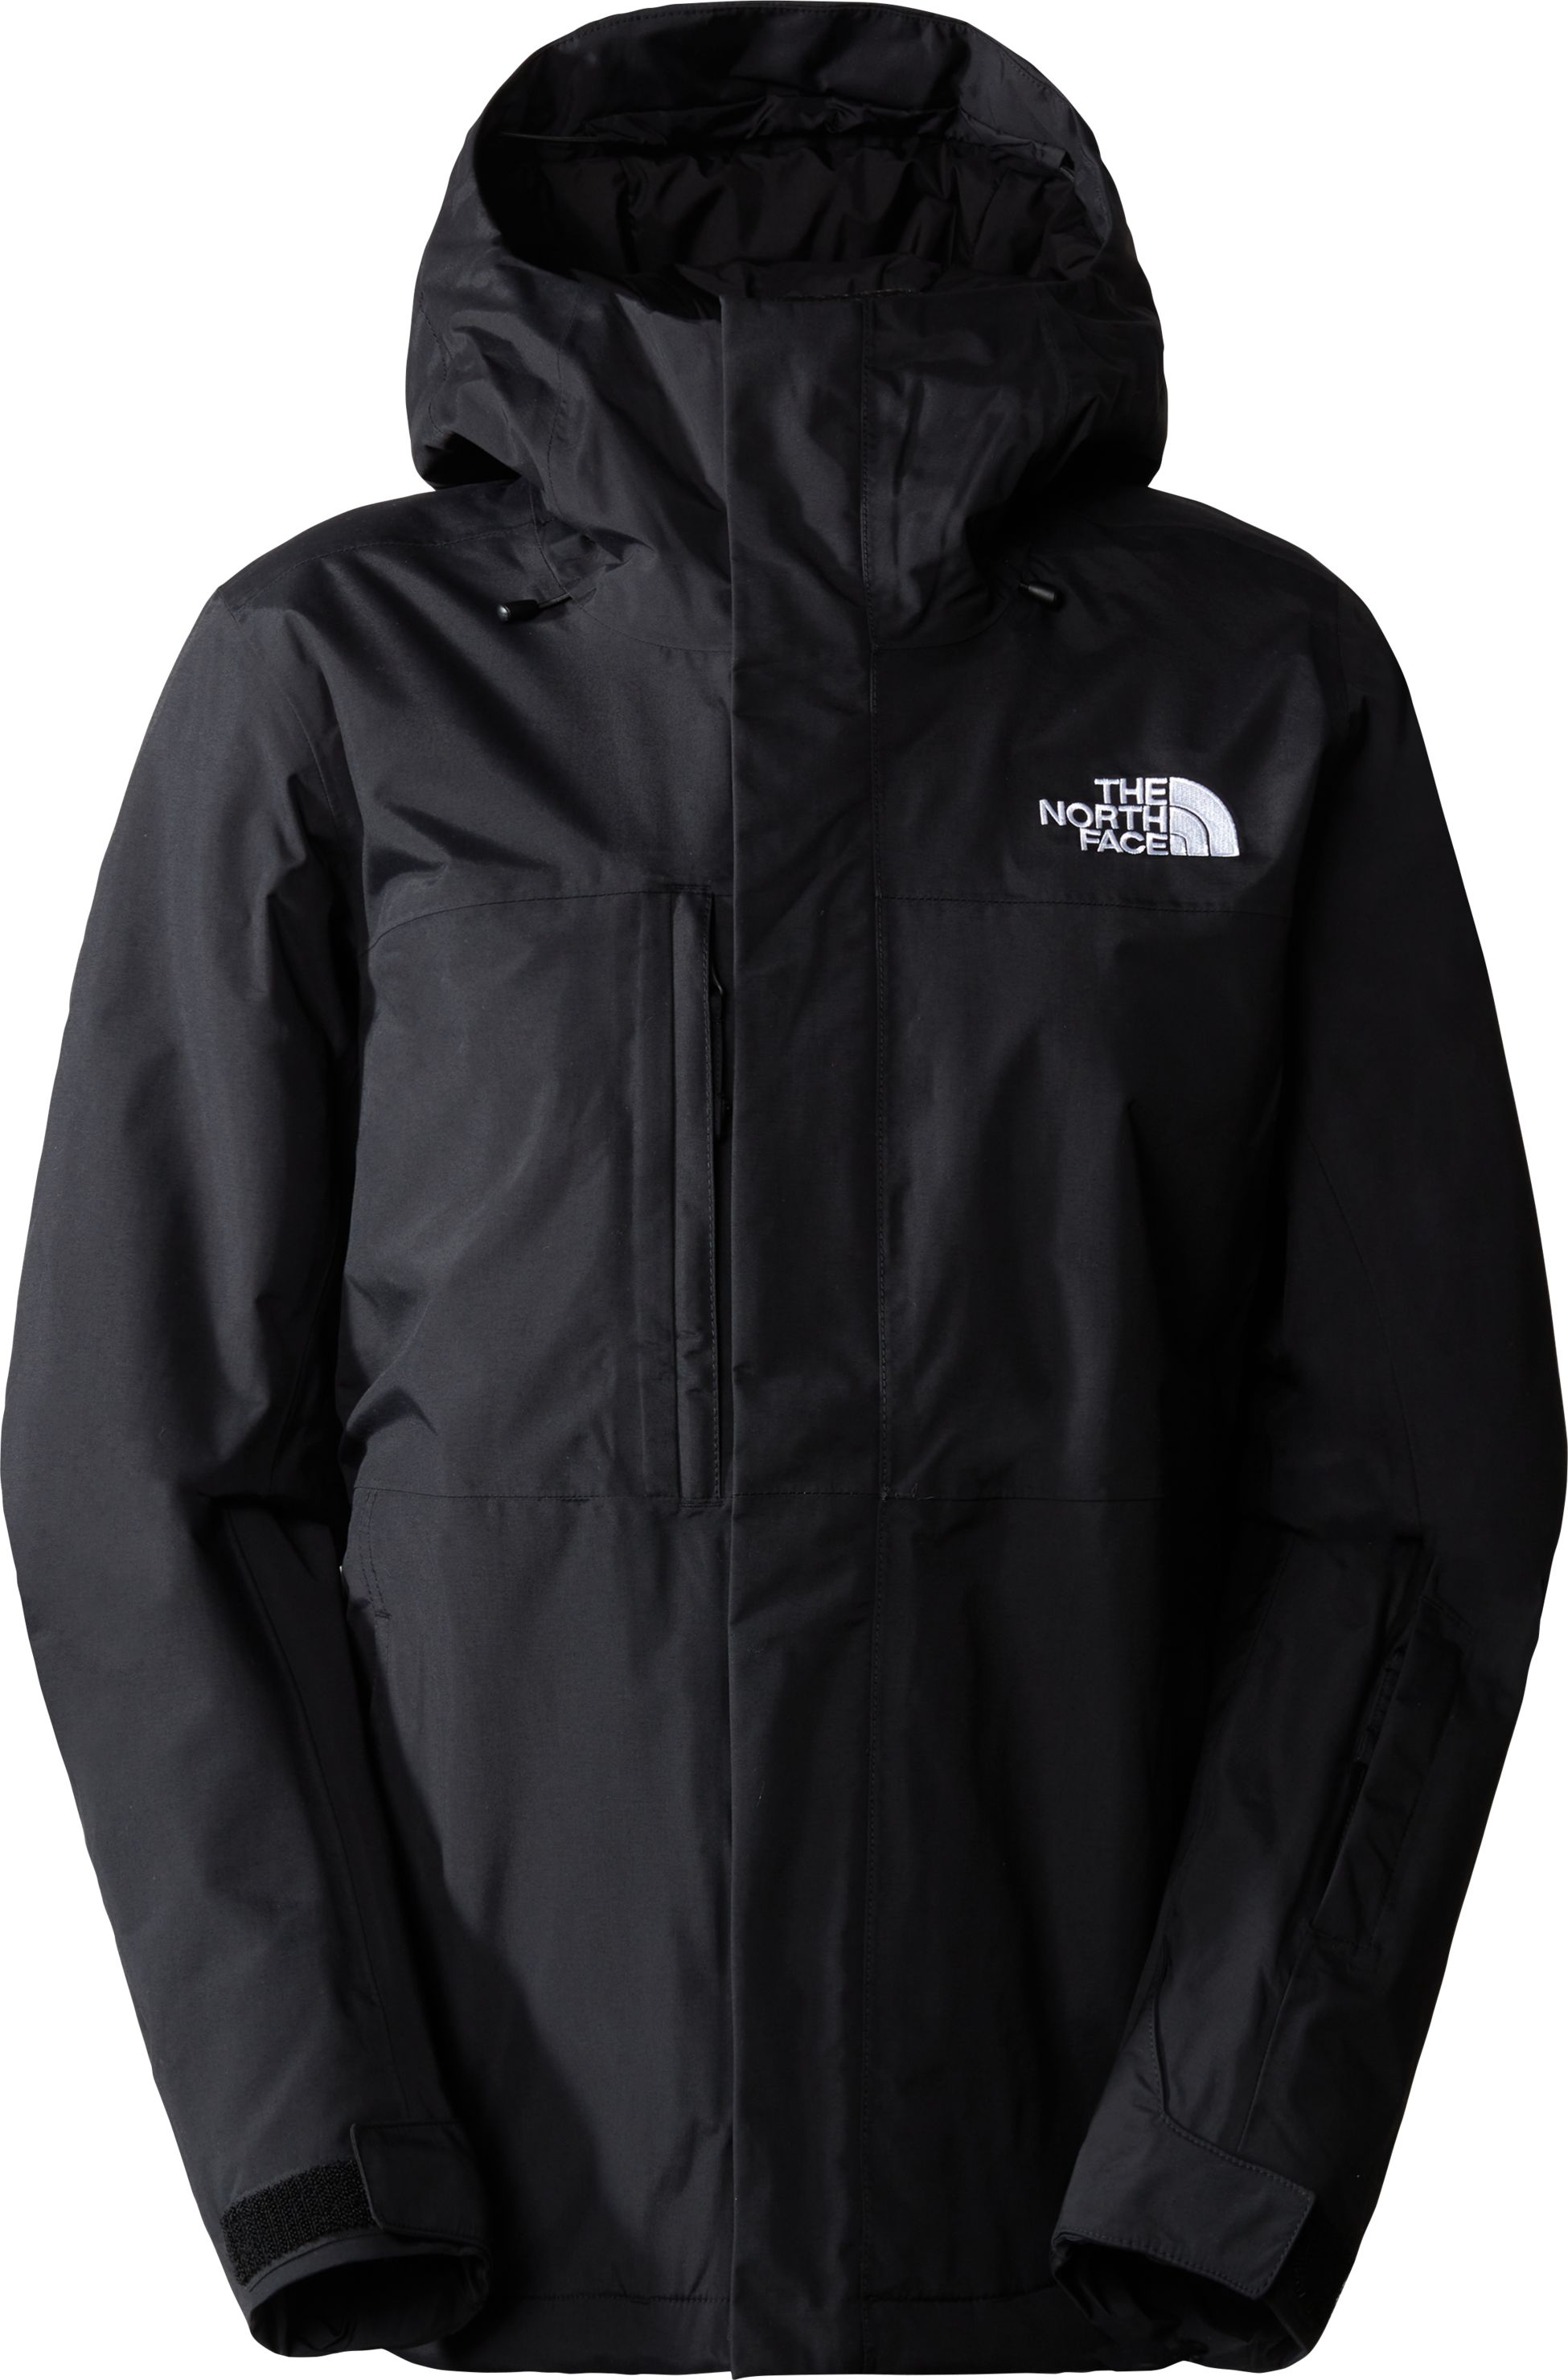 THE NORTH FACE, W FREEDOM INSULATED JACKET